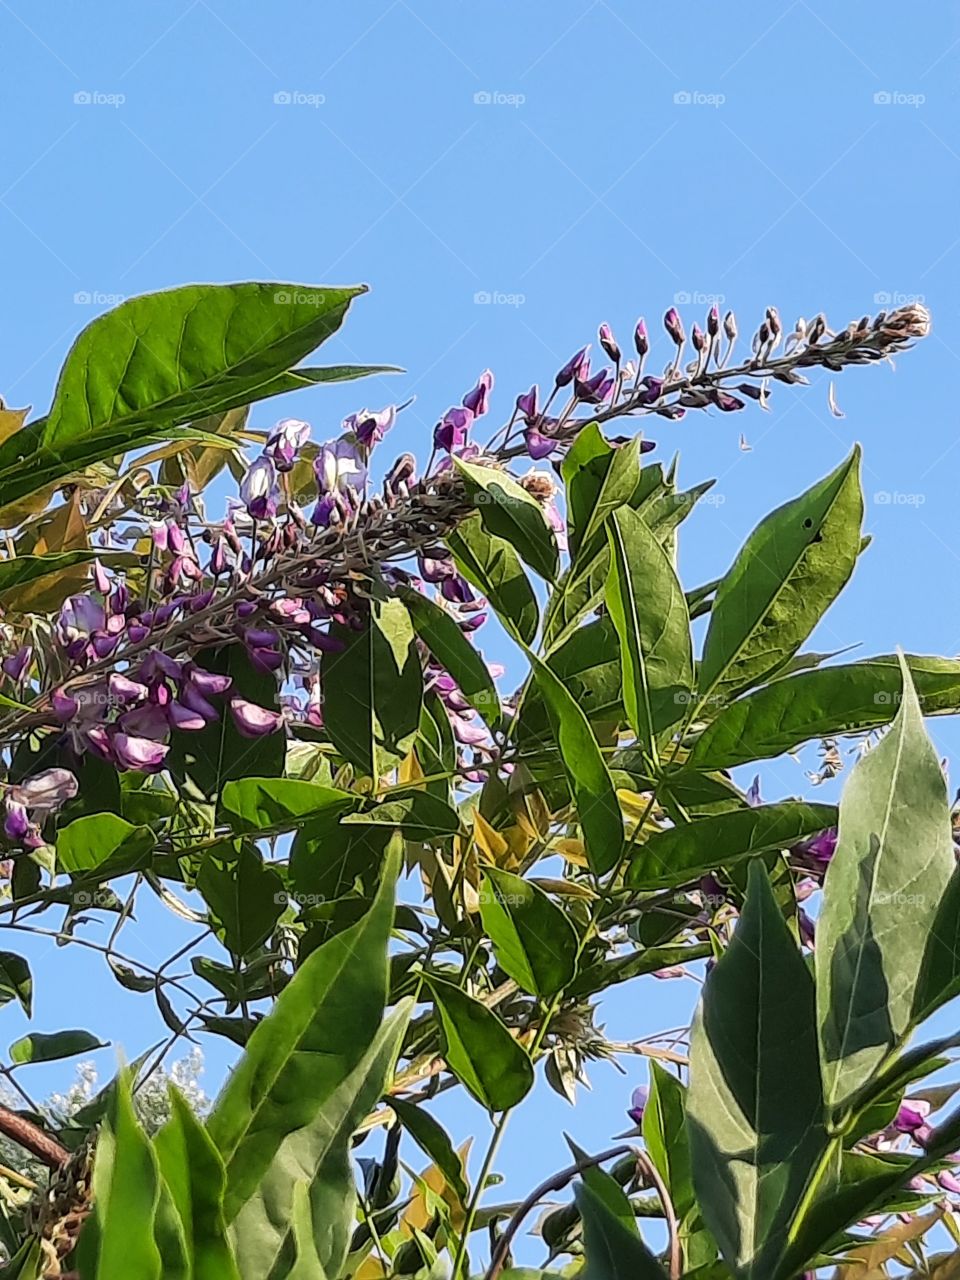 secondary blooming of purple wisteria against blue sky